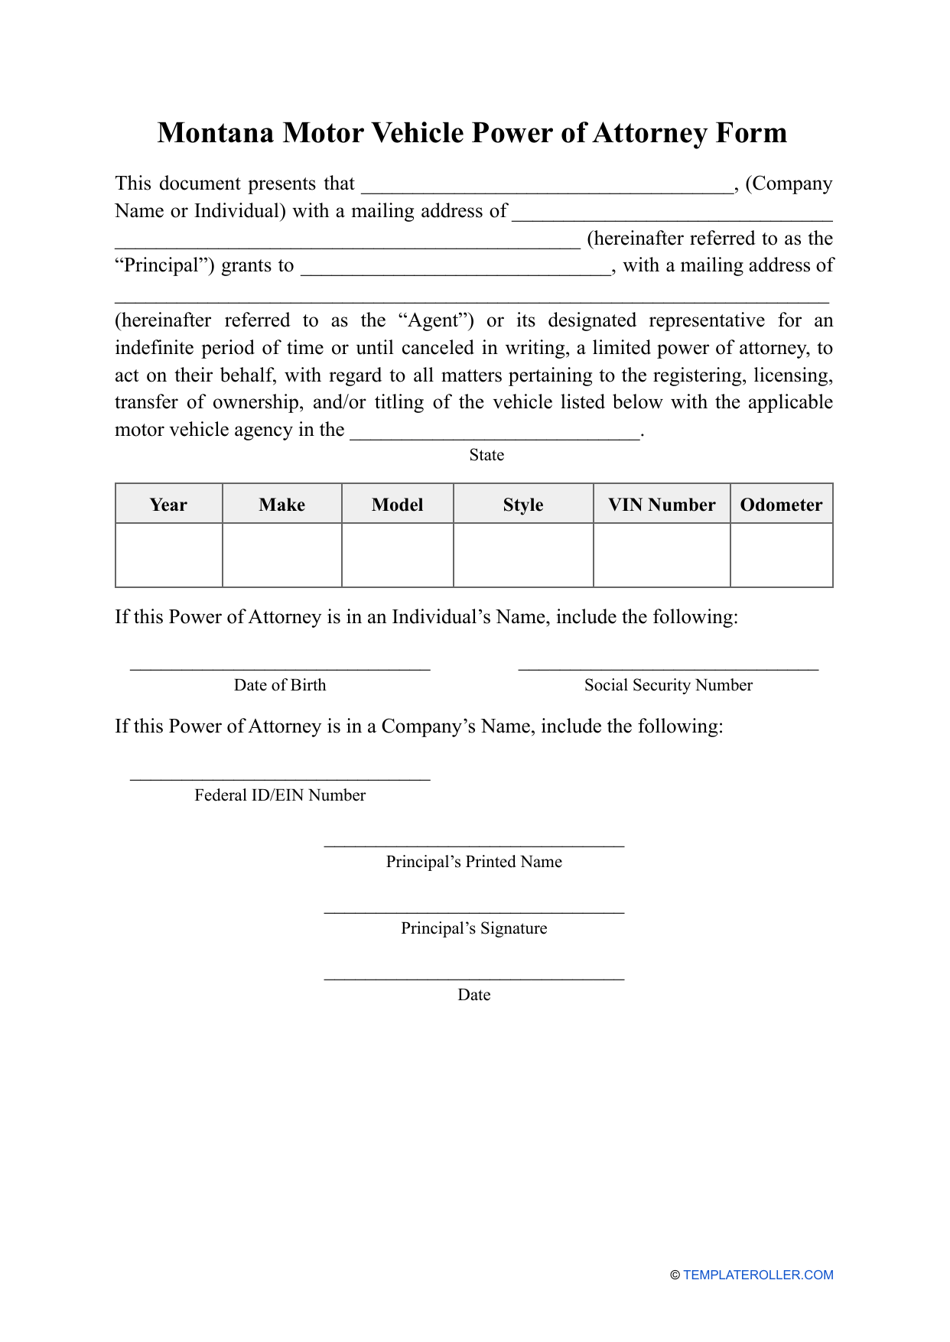 Motor Vehicle Power of Attorney Form - Montana, Page 1